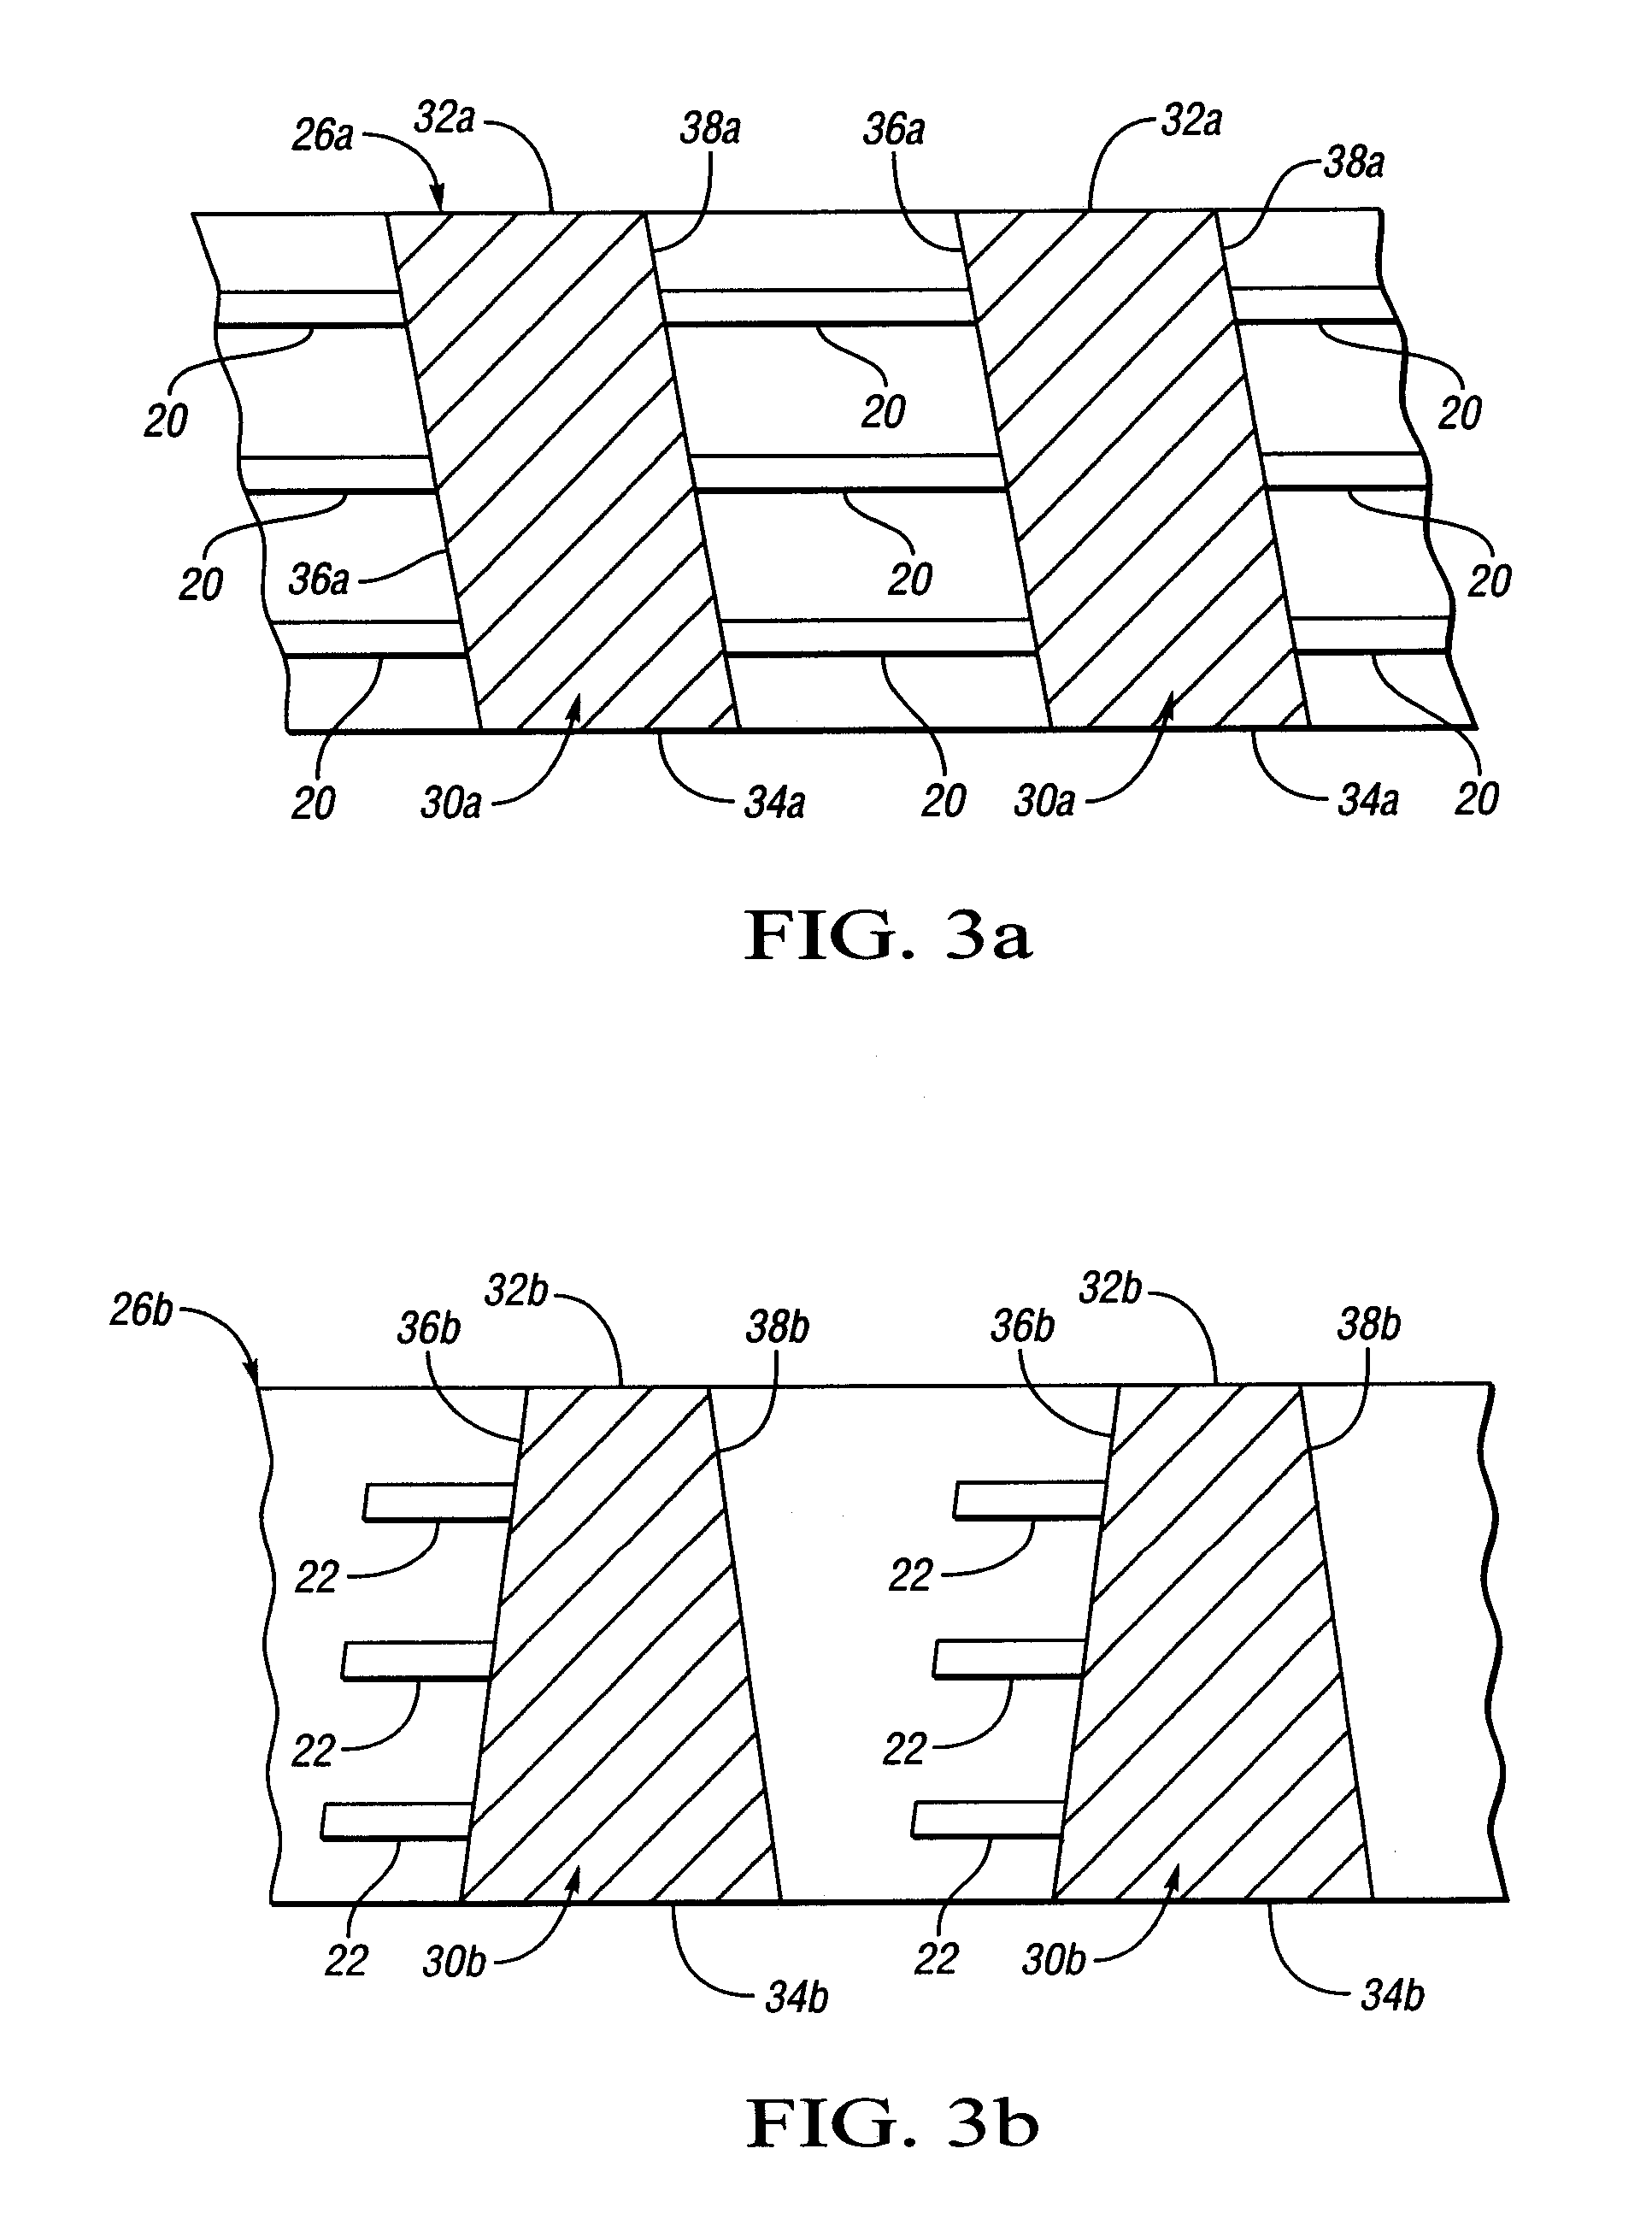 Broaching apparatus and method for producing a gear member with tapered gear teeth